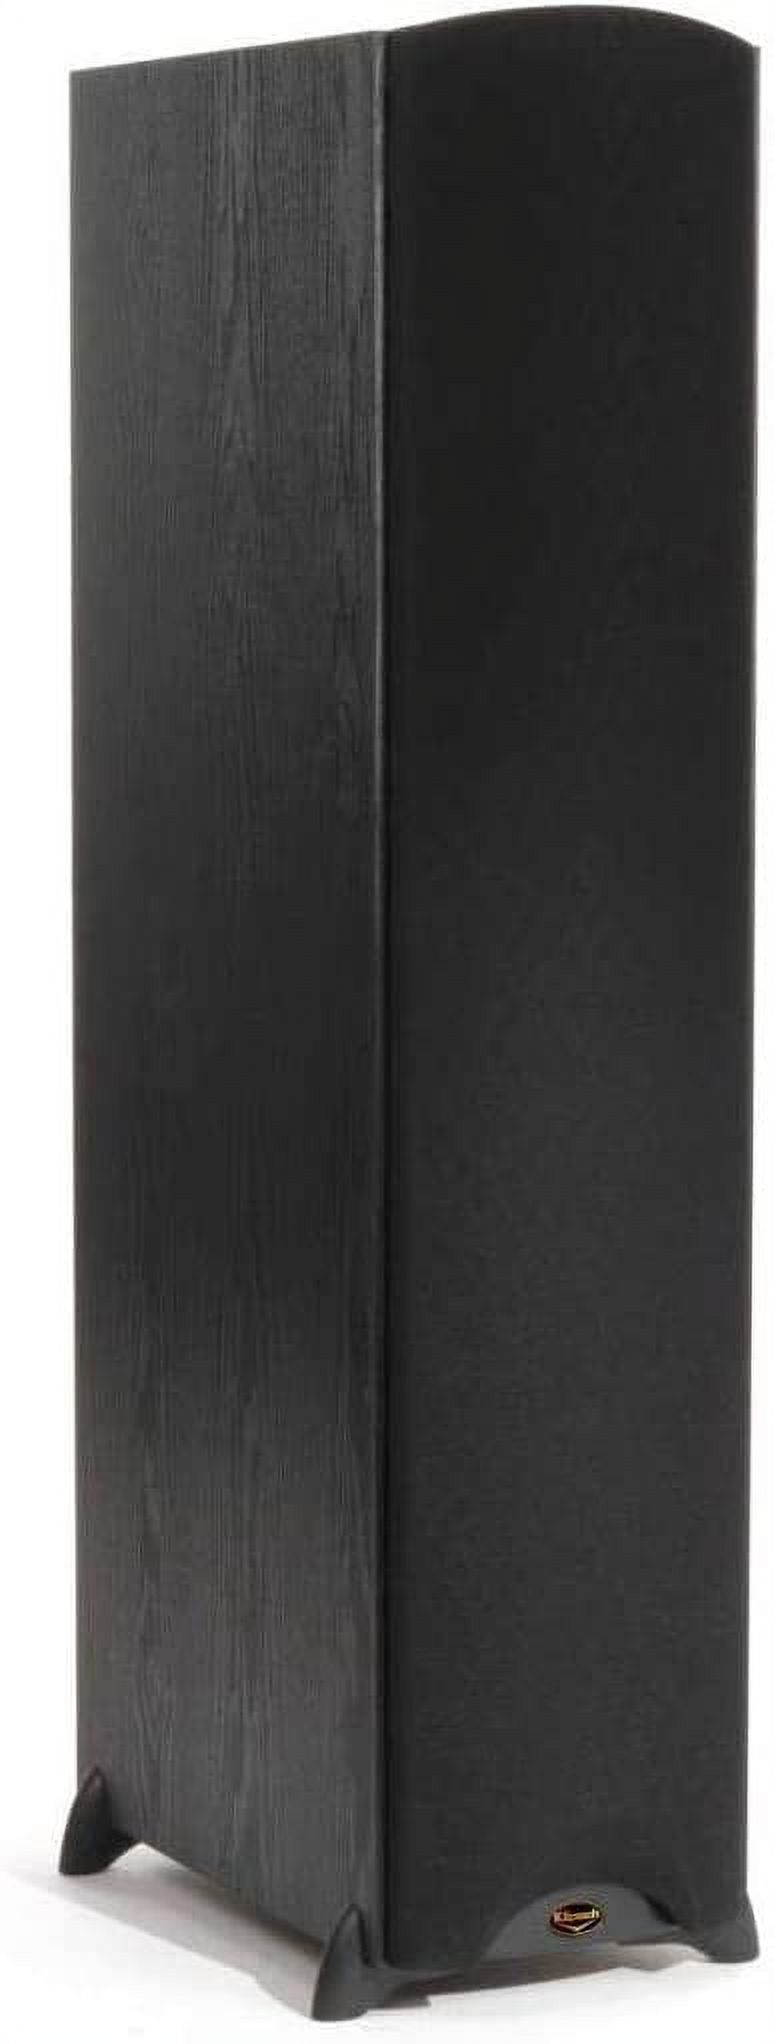 Klipsch Synergy Black Label F-300 Floorstanding Speaker with Dual 8" Woofers, Pair - image 2 of 5